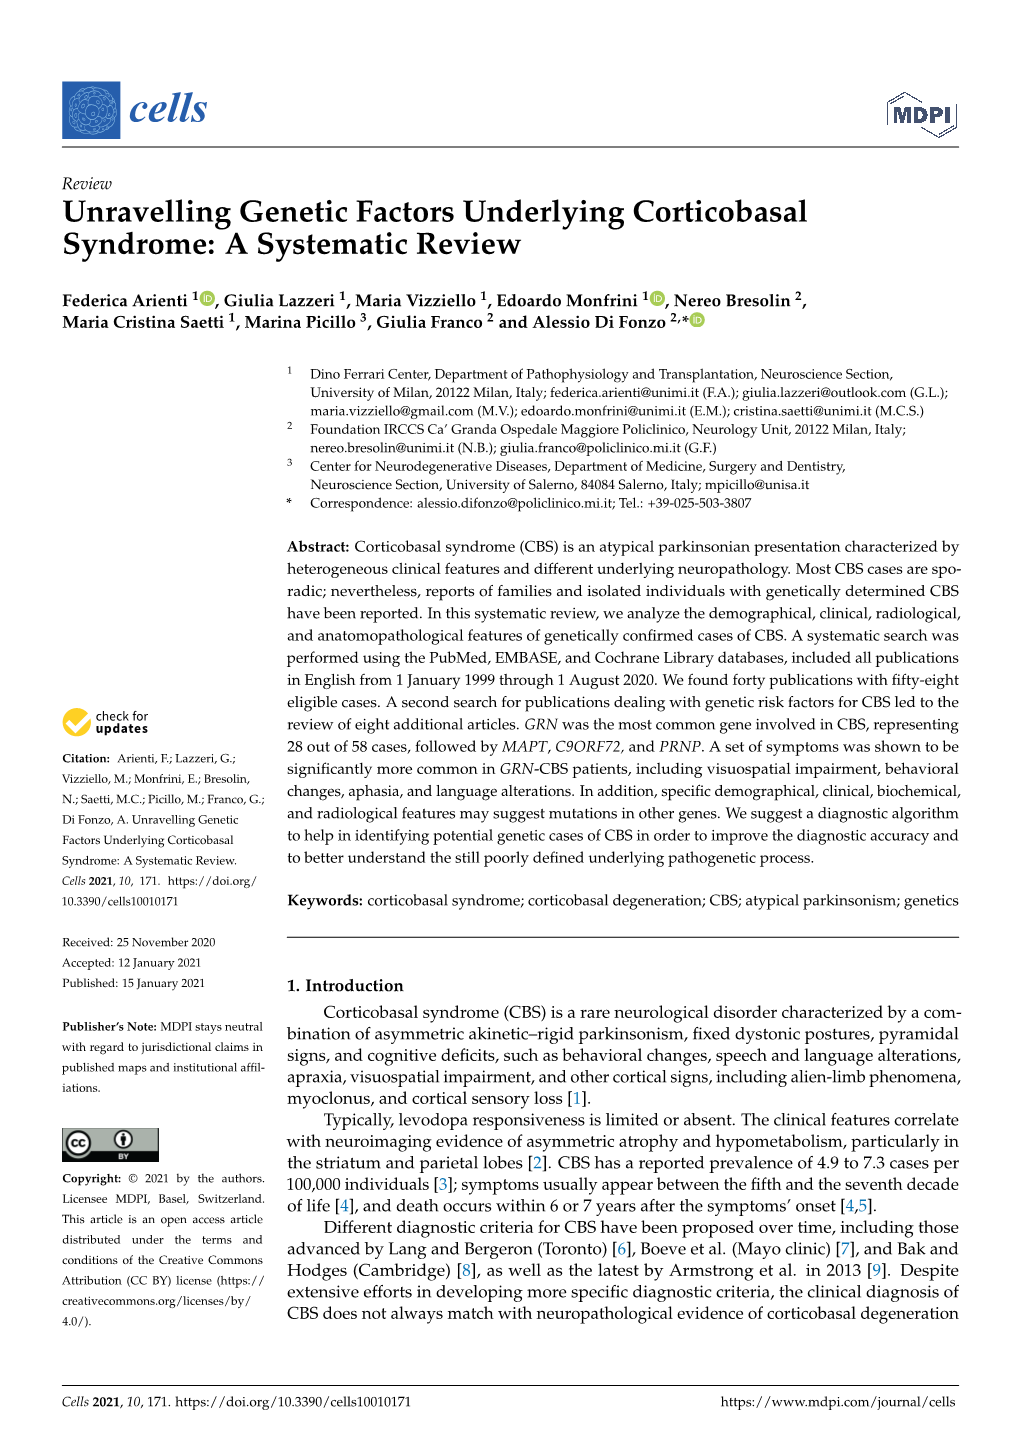 Unravelling Genetic Factors Underlying Corticobasal Syndrome: a Systematic Review